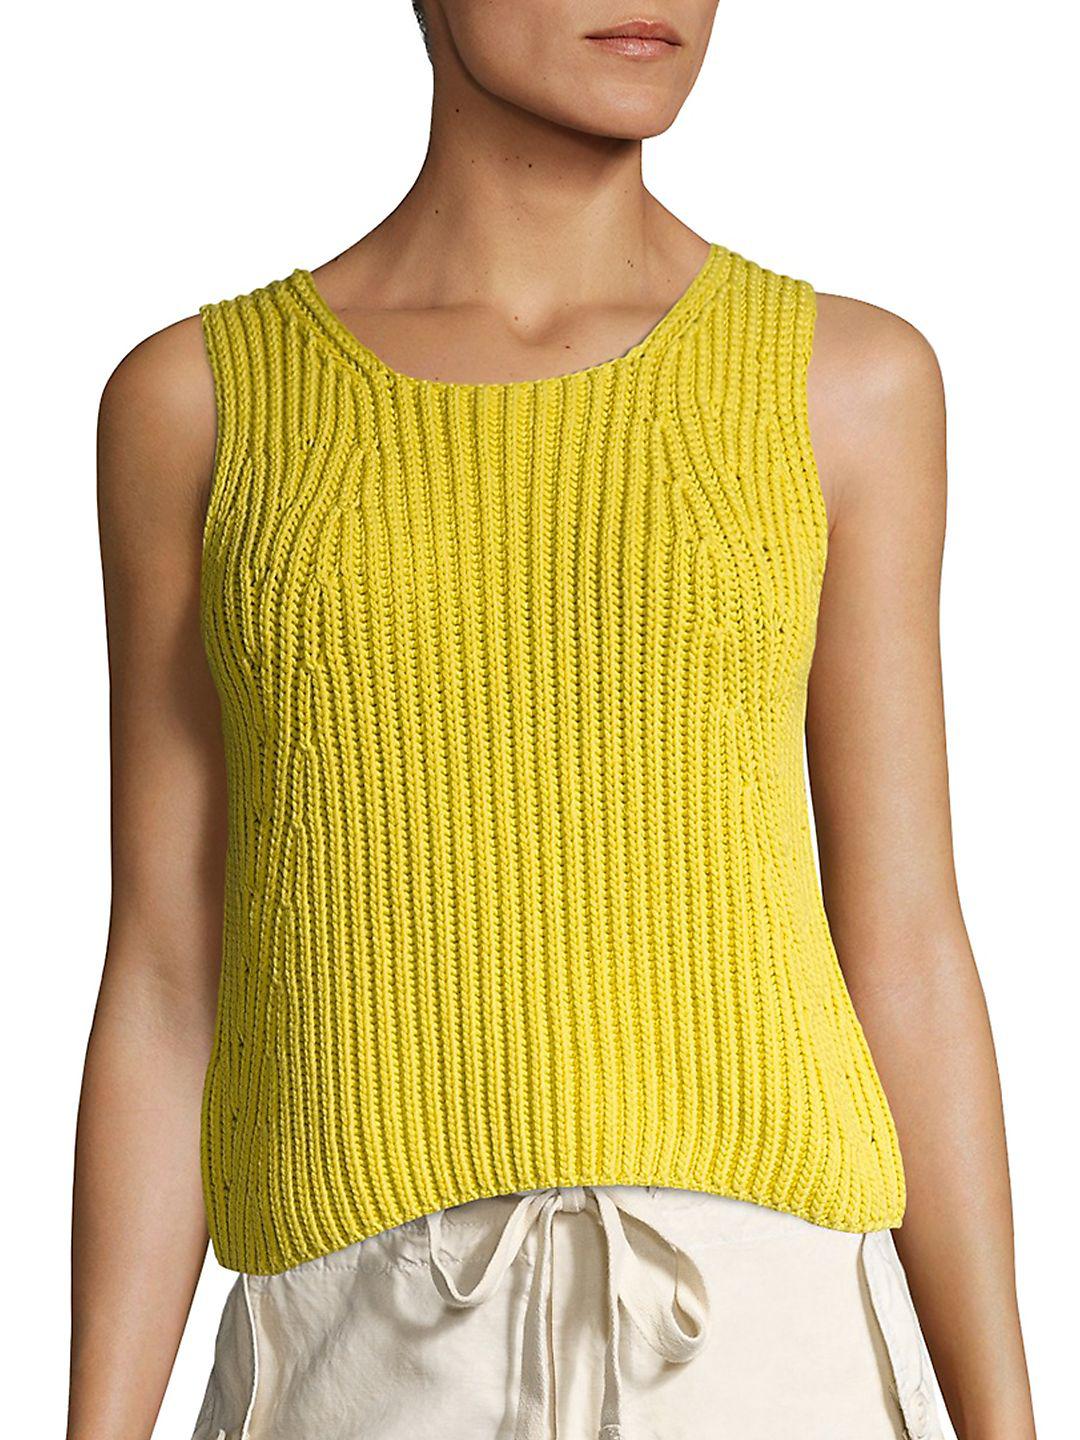 Vince Cotton Chunky Rib-knit Tank Top in White - Lyst